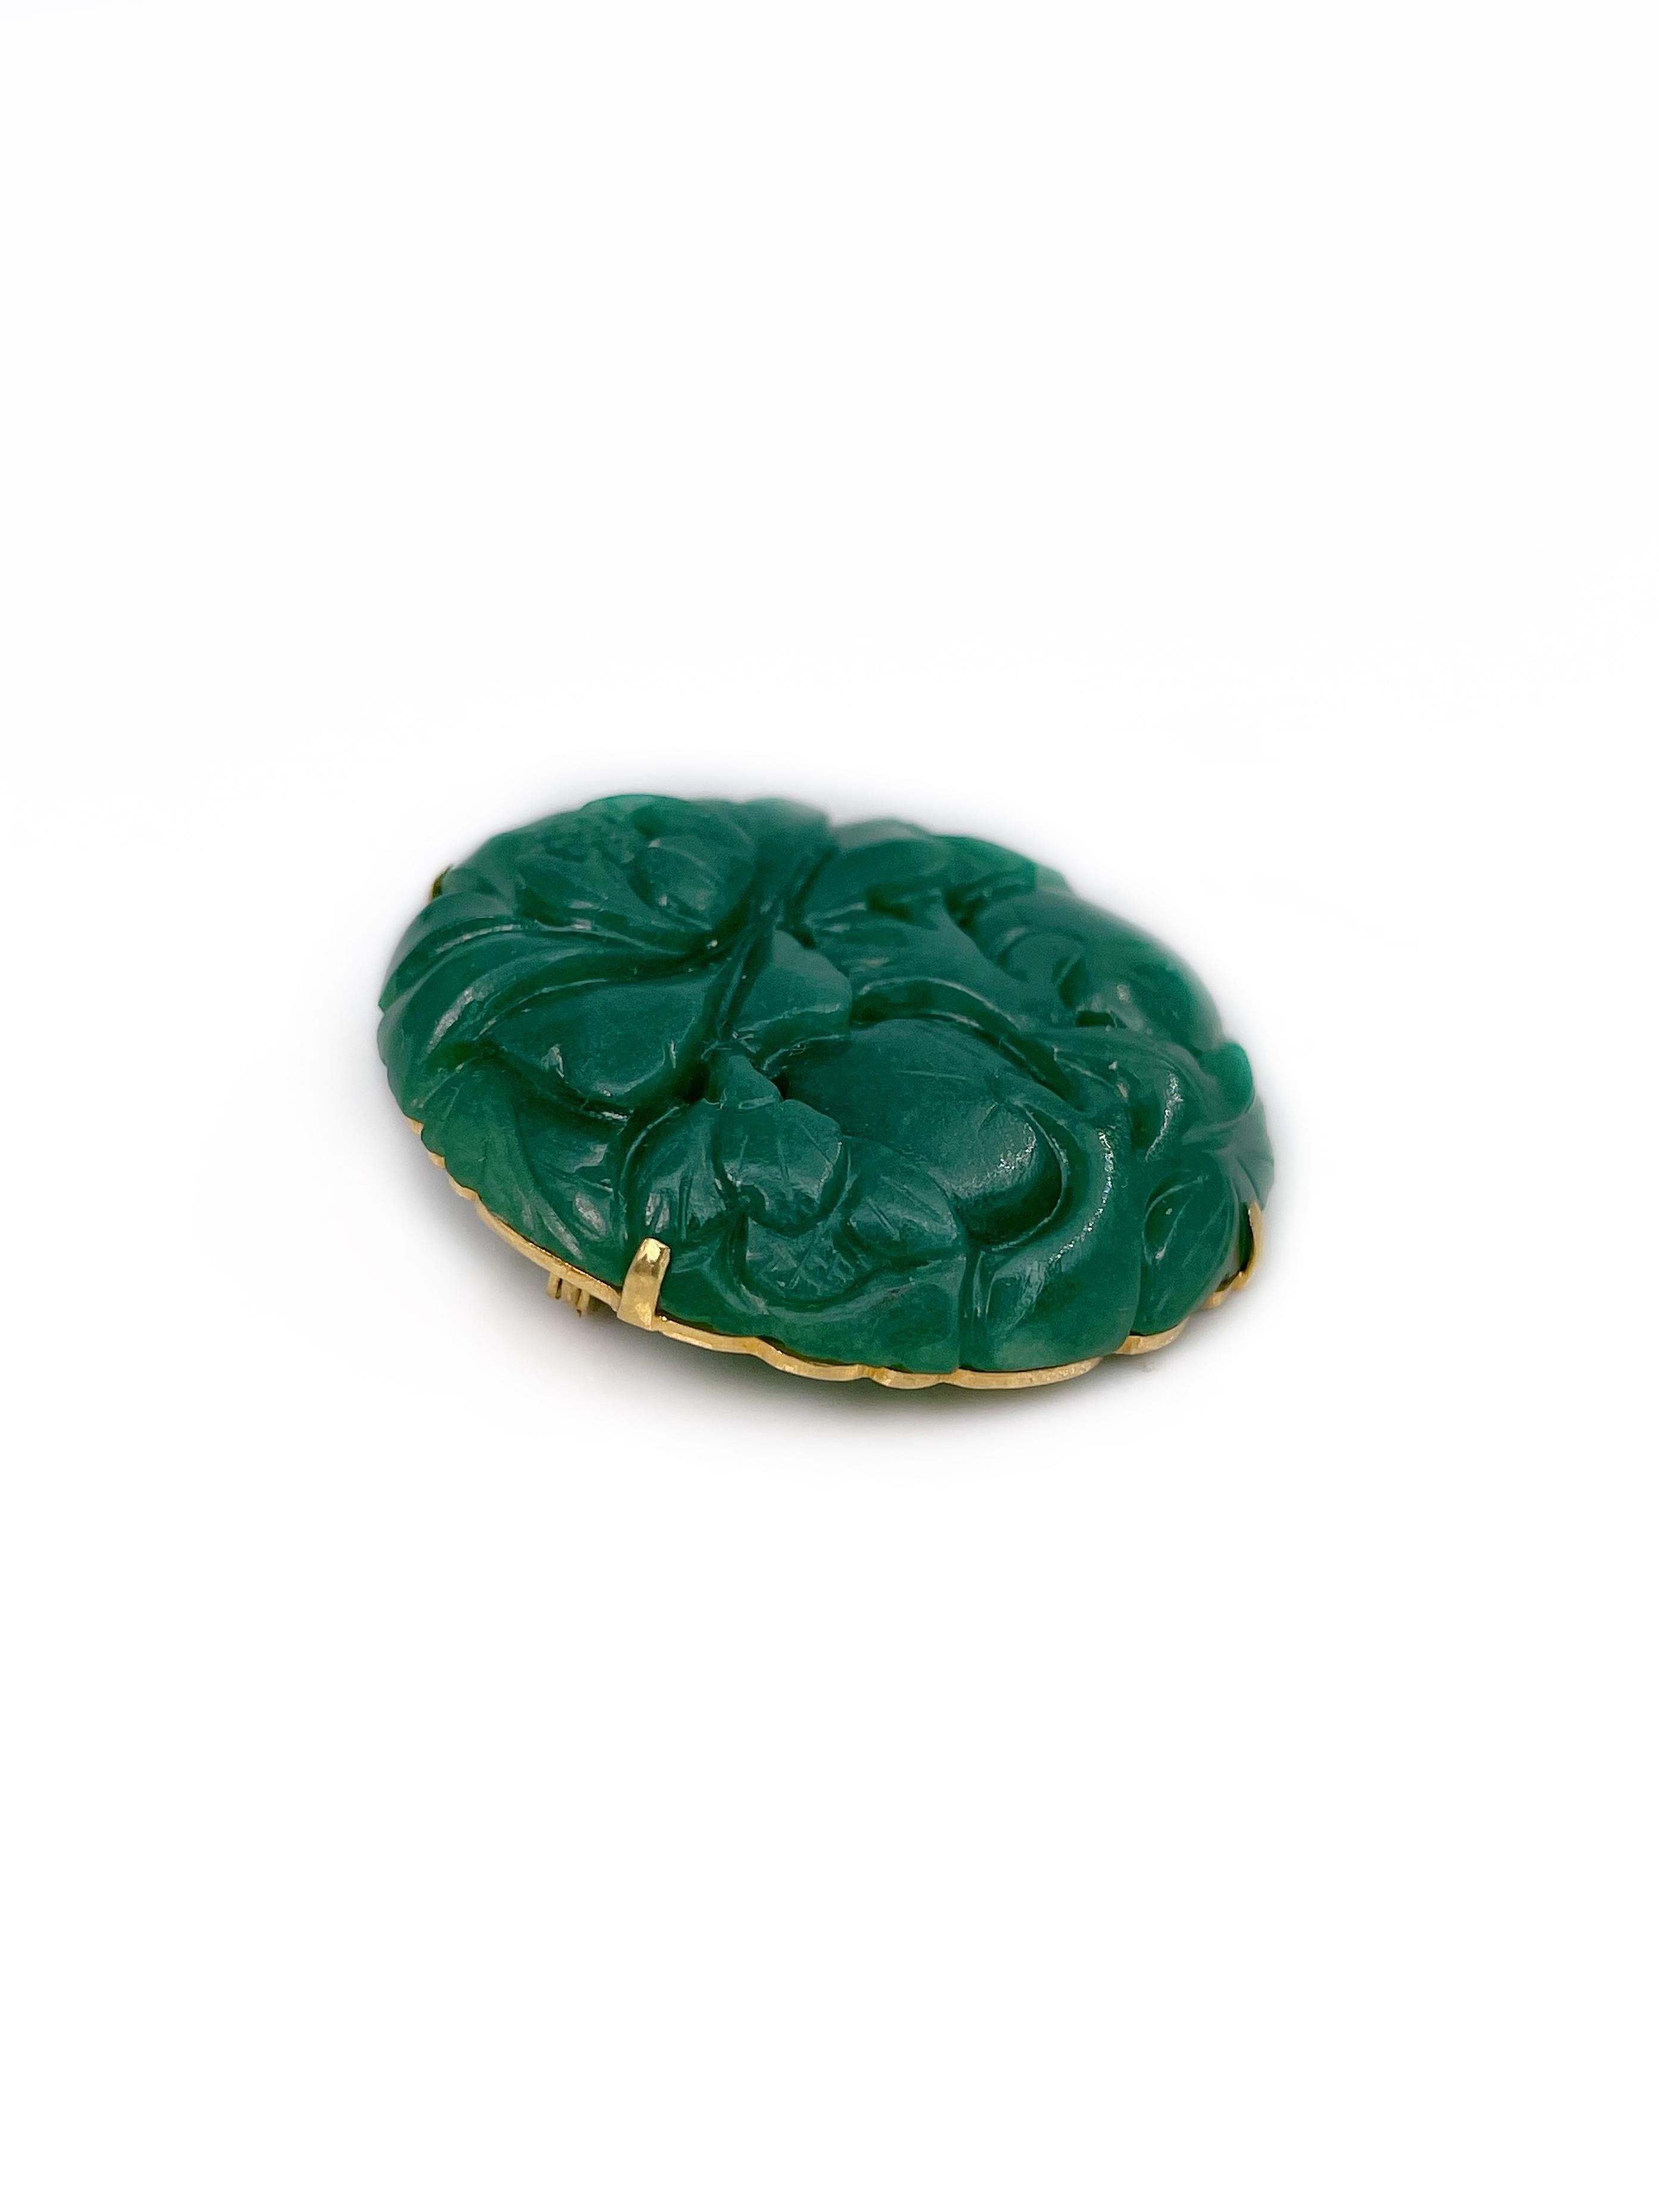 This is an amazing vintage round pin brooch crafted in 14K yellow gold. Circa 1960. 

It is made of carved green chalcedony depicting a lotus flower. 

Weight: 12.91g
Diameter: 3.5cm

———

If you have any questions, please feel free to ask. We